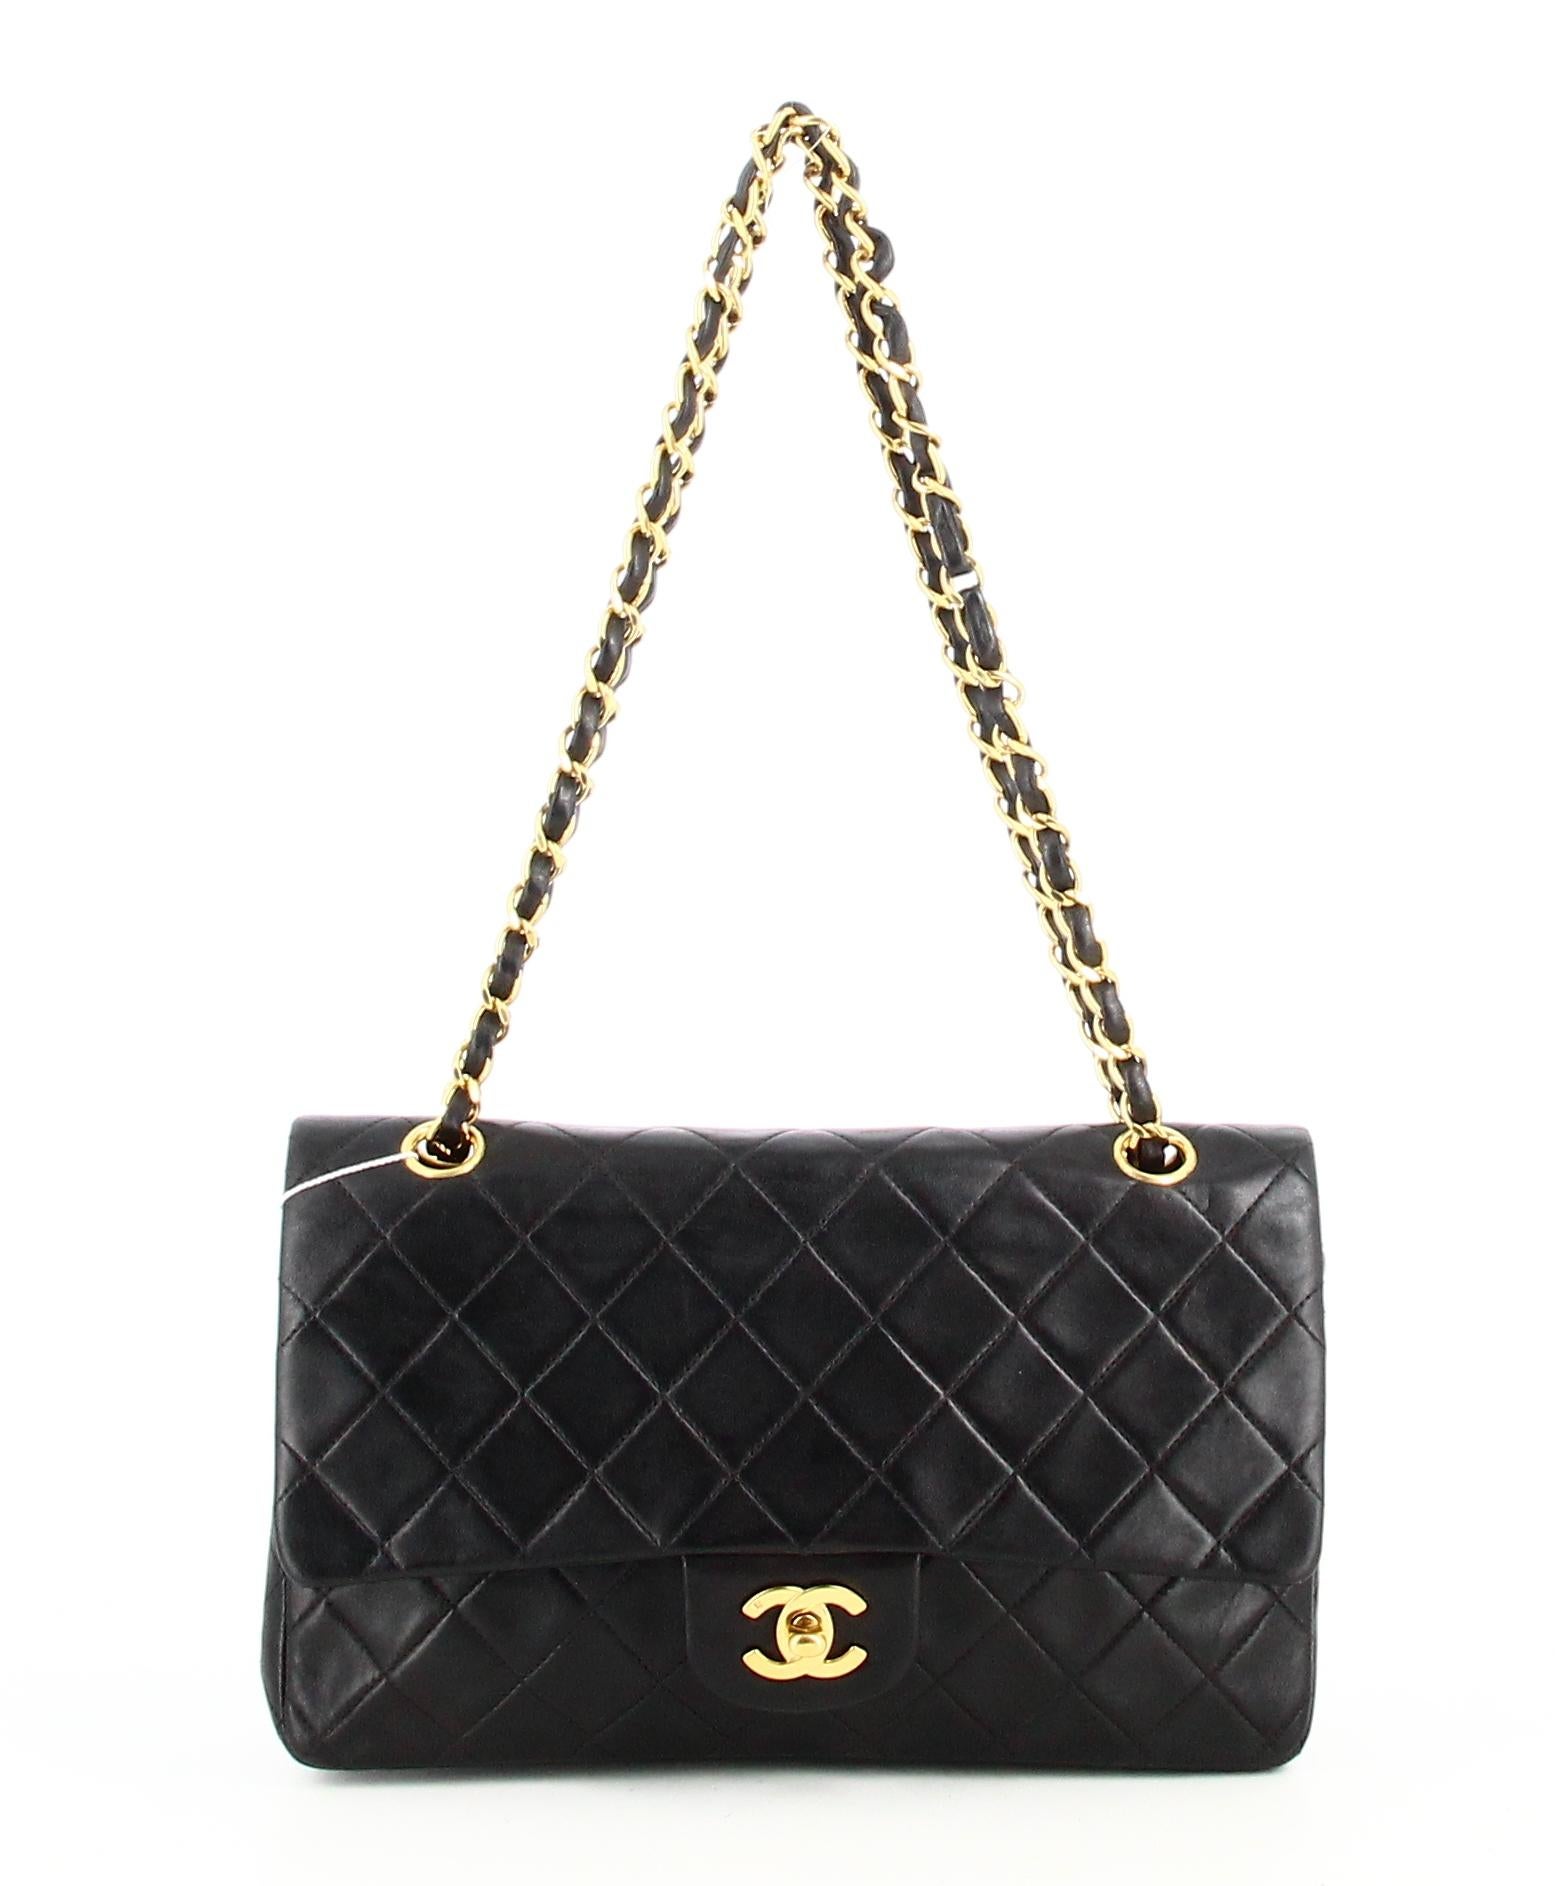 1991 Chanel Timeless Handbag In Black Quilted Leather 

- Good condition. Shows very slight signs of wear over time
- Chanel timeless handbag
- Black quilted leather
- Clasp: double C golden Chanel logo
- Double golden chain intertwined in black